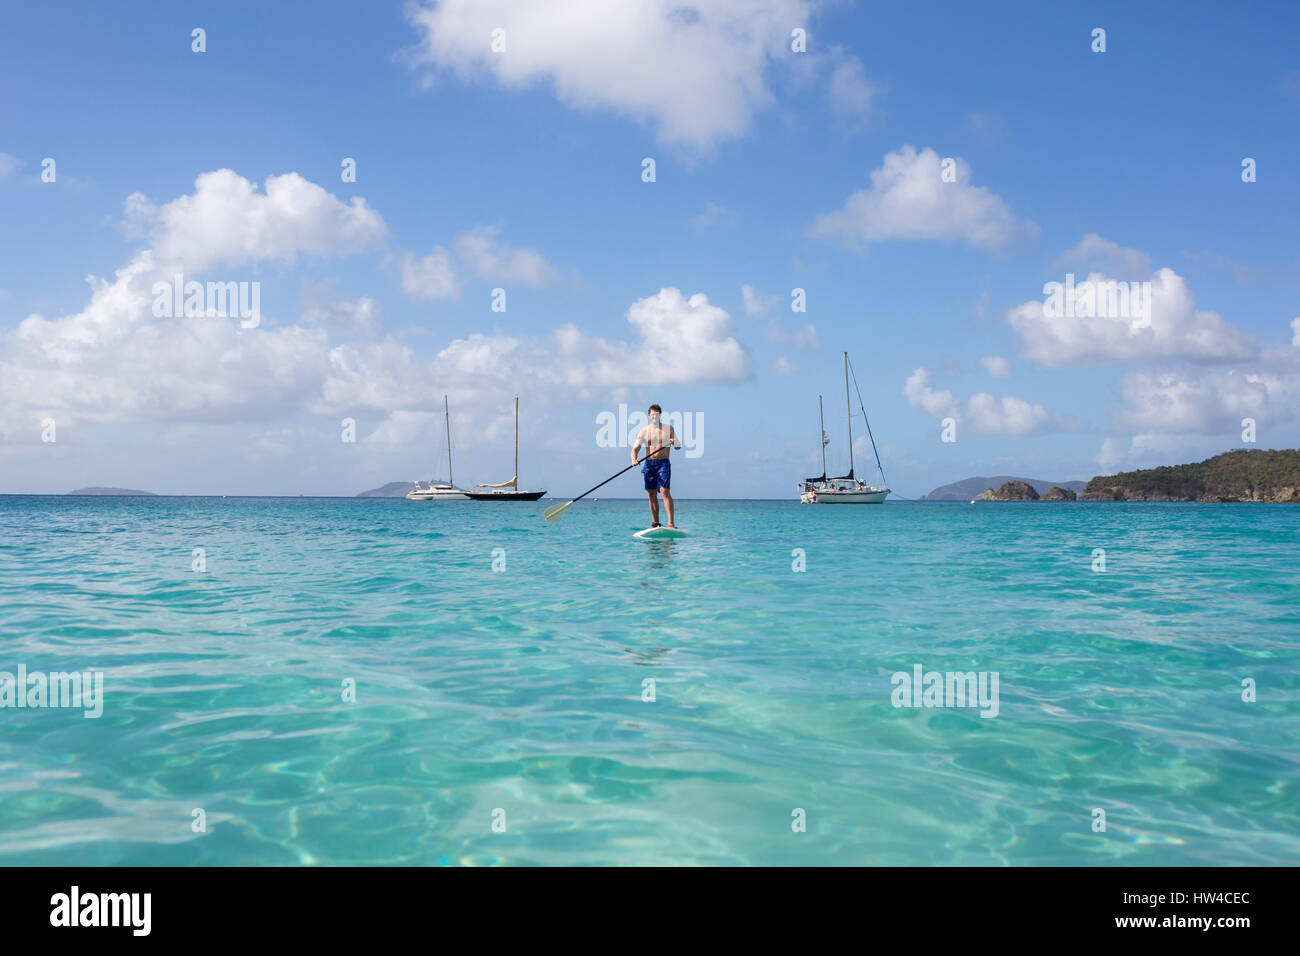 Caucasian man standing on paddle board on ocean Stock Photo